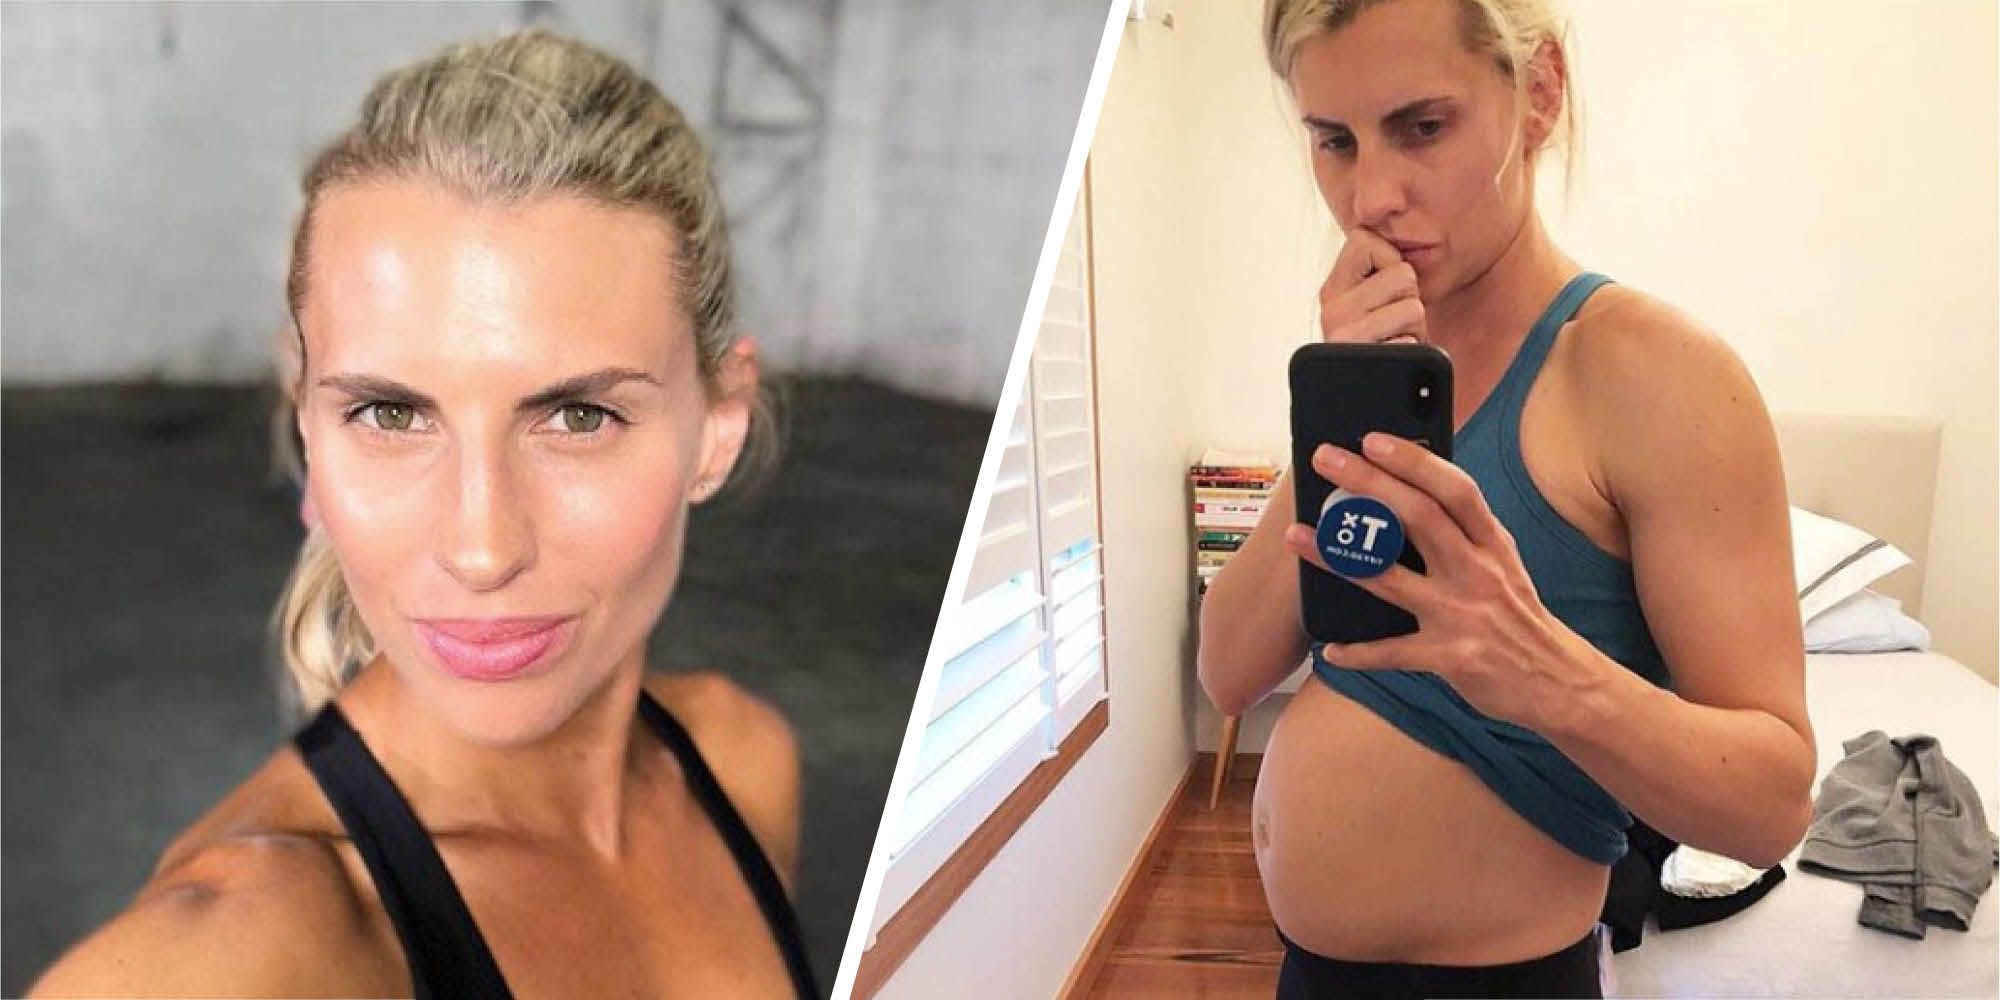 Fitness trainer shares the surprising cause of her intense bloating